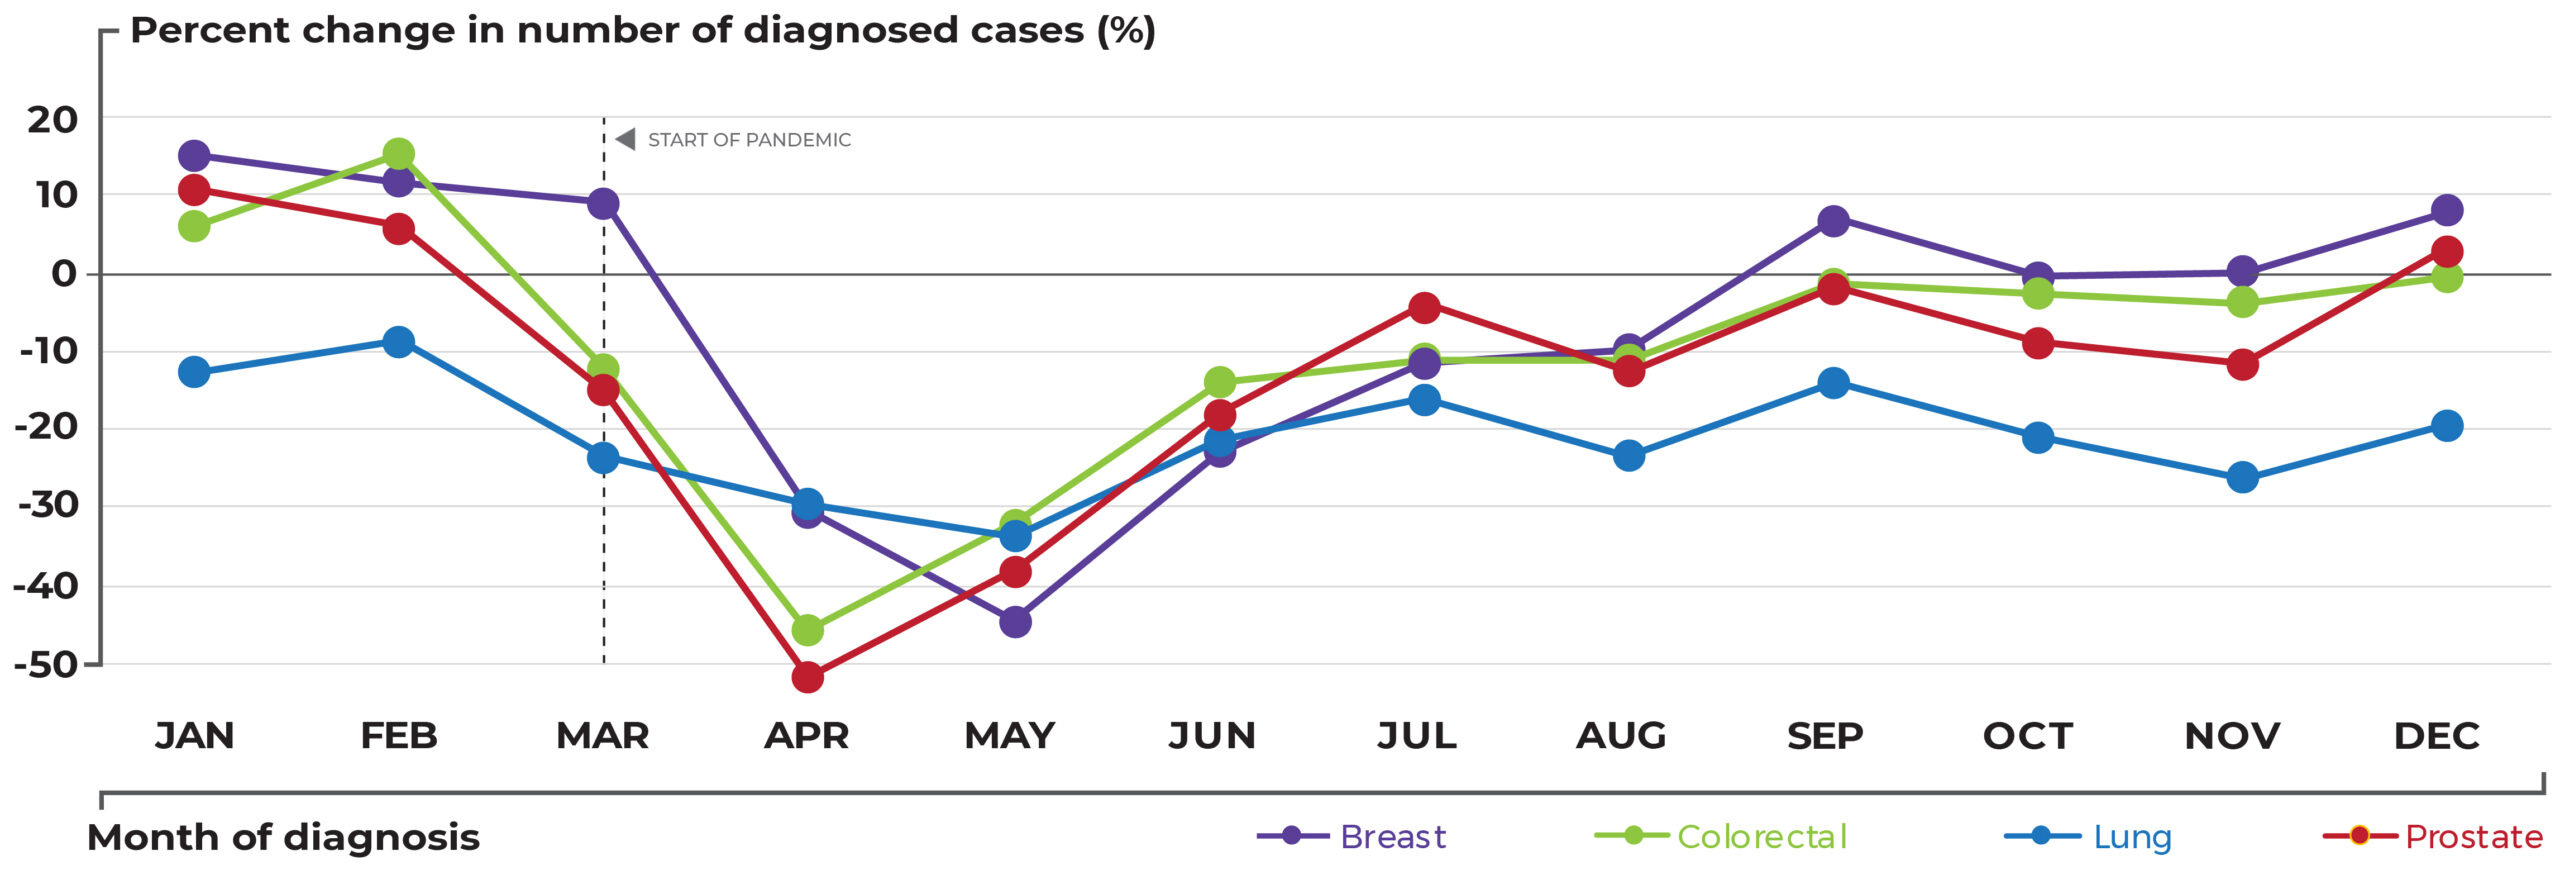 Significant drop in diagnoses in April and May 2020. See full description on link below.